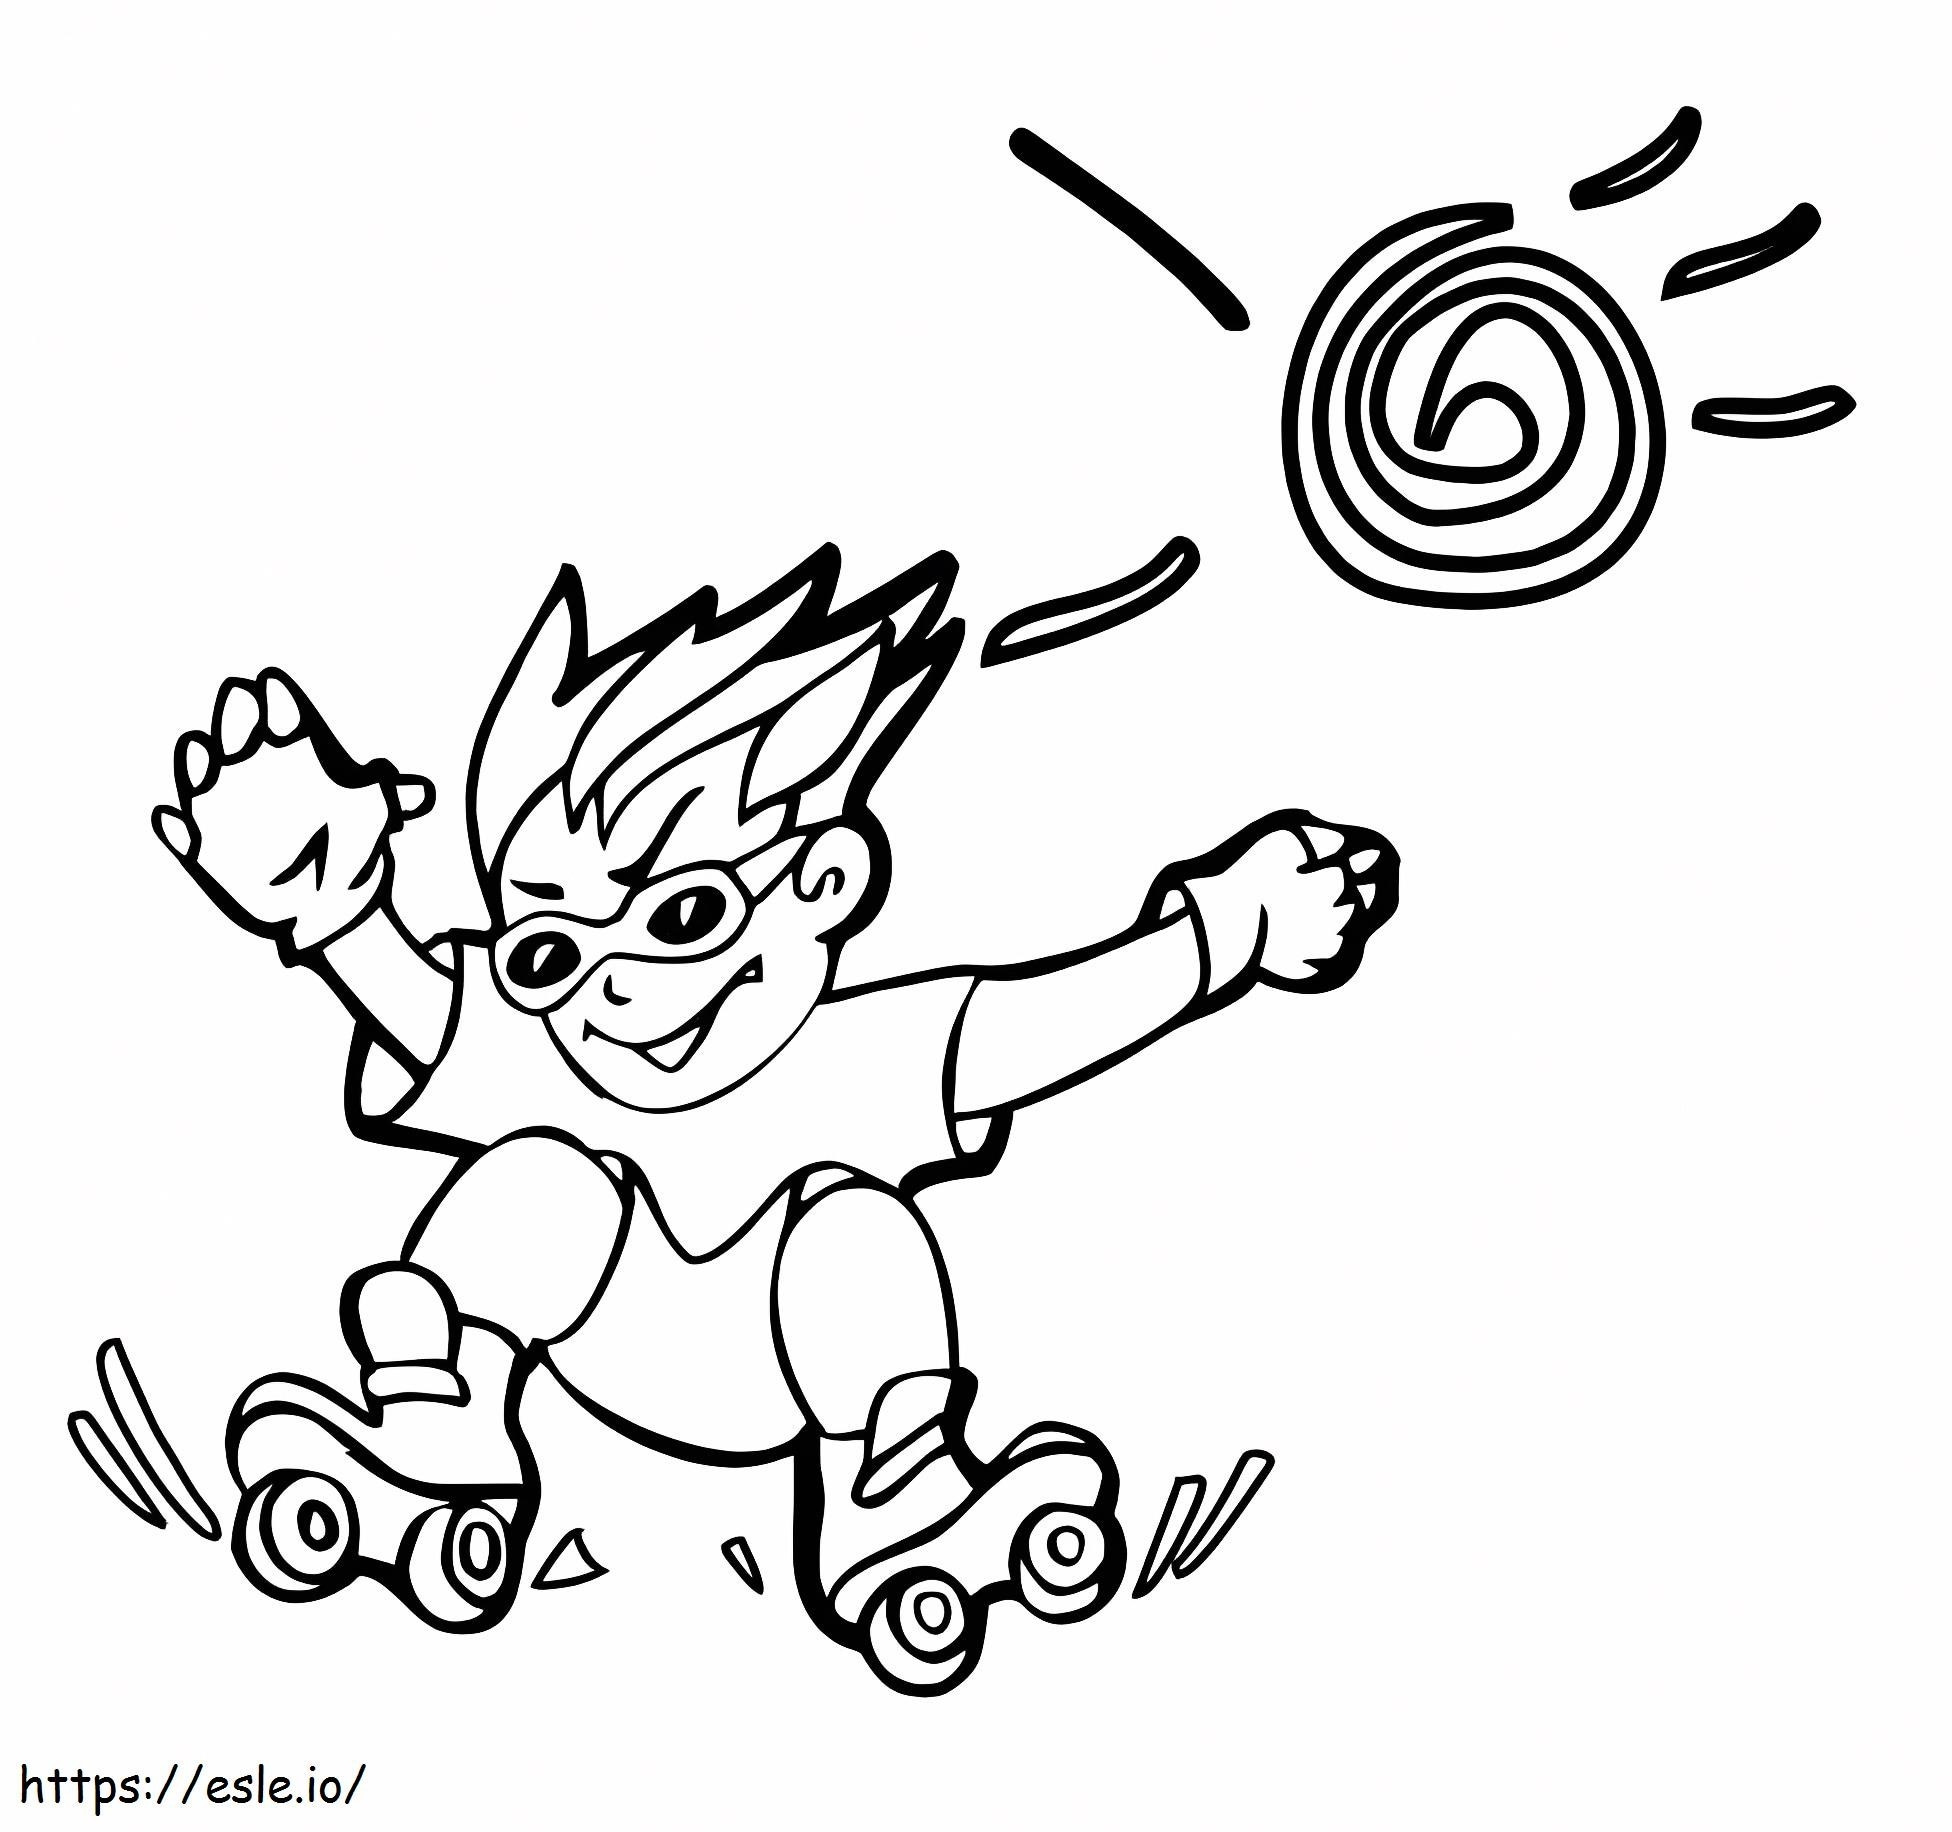 Cool Boy On Roller Skates coloring page